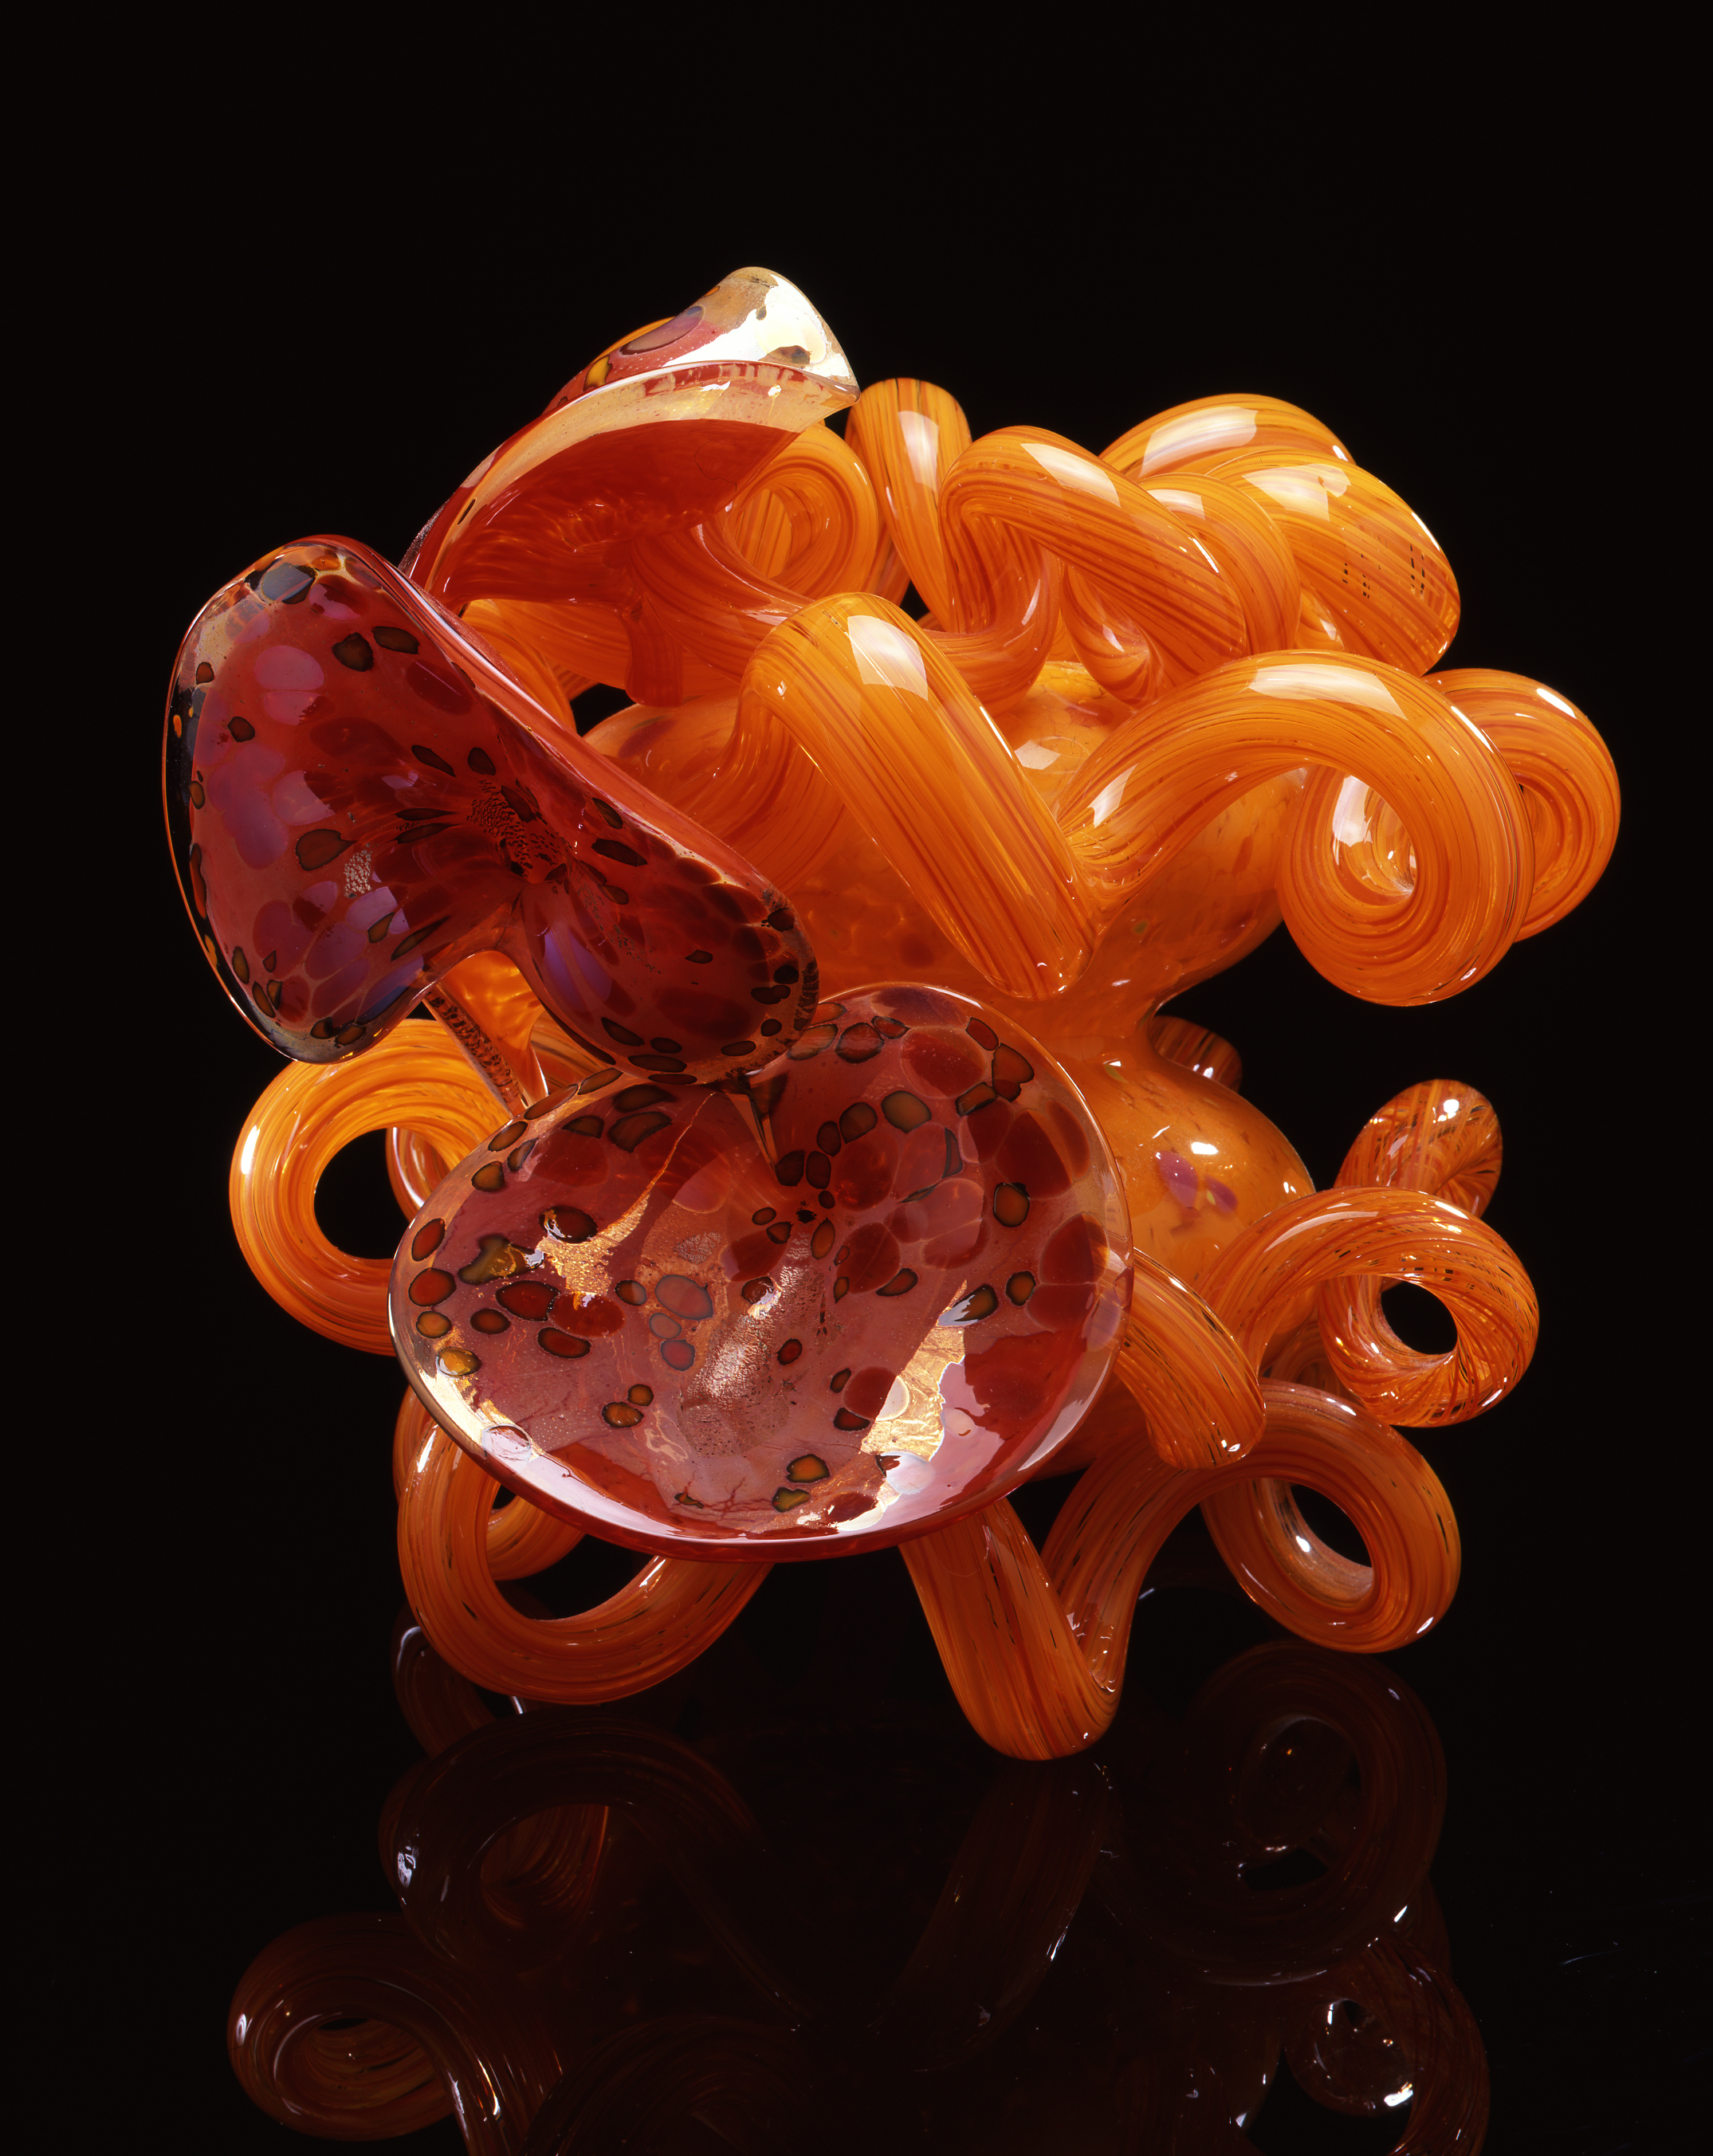  Dale Chihuly,&nbsp; Cadmium Orange Coiled Venetian with Lilies &nbsp;(1991, glass, 17 x 19 x 17 inches) 